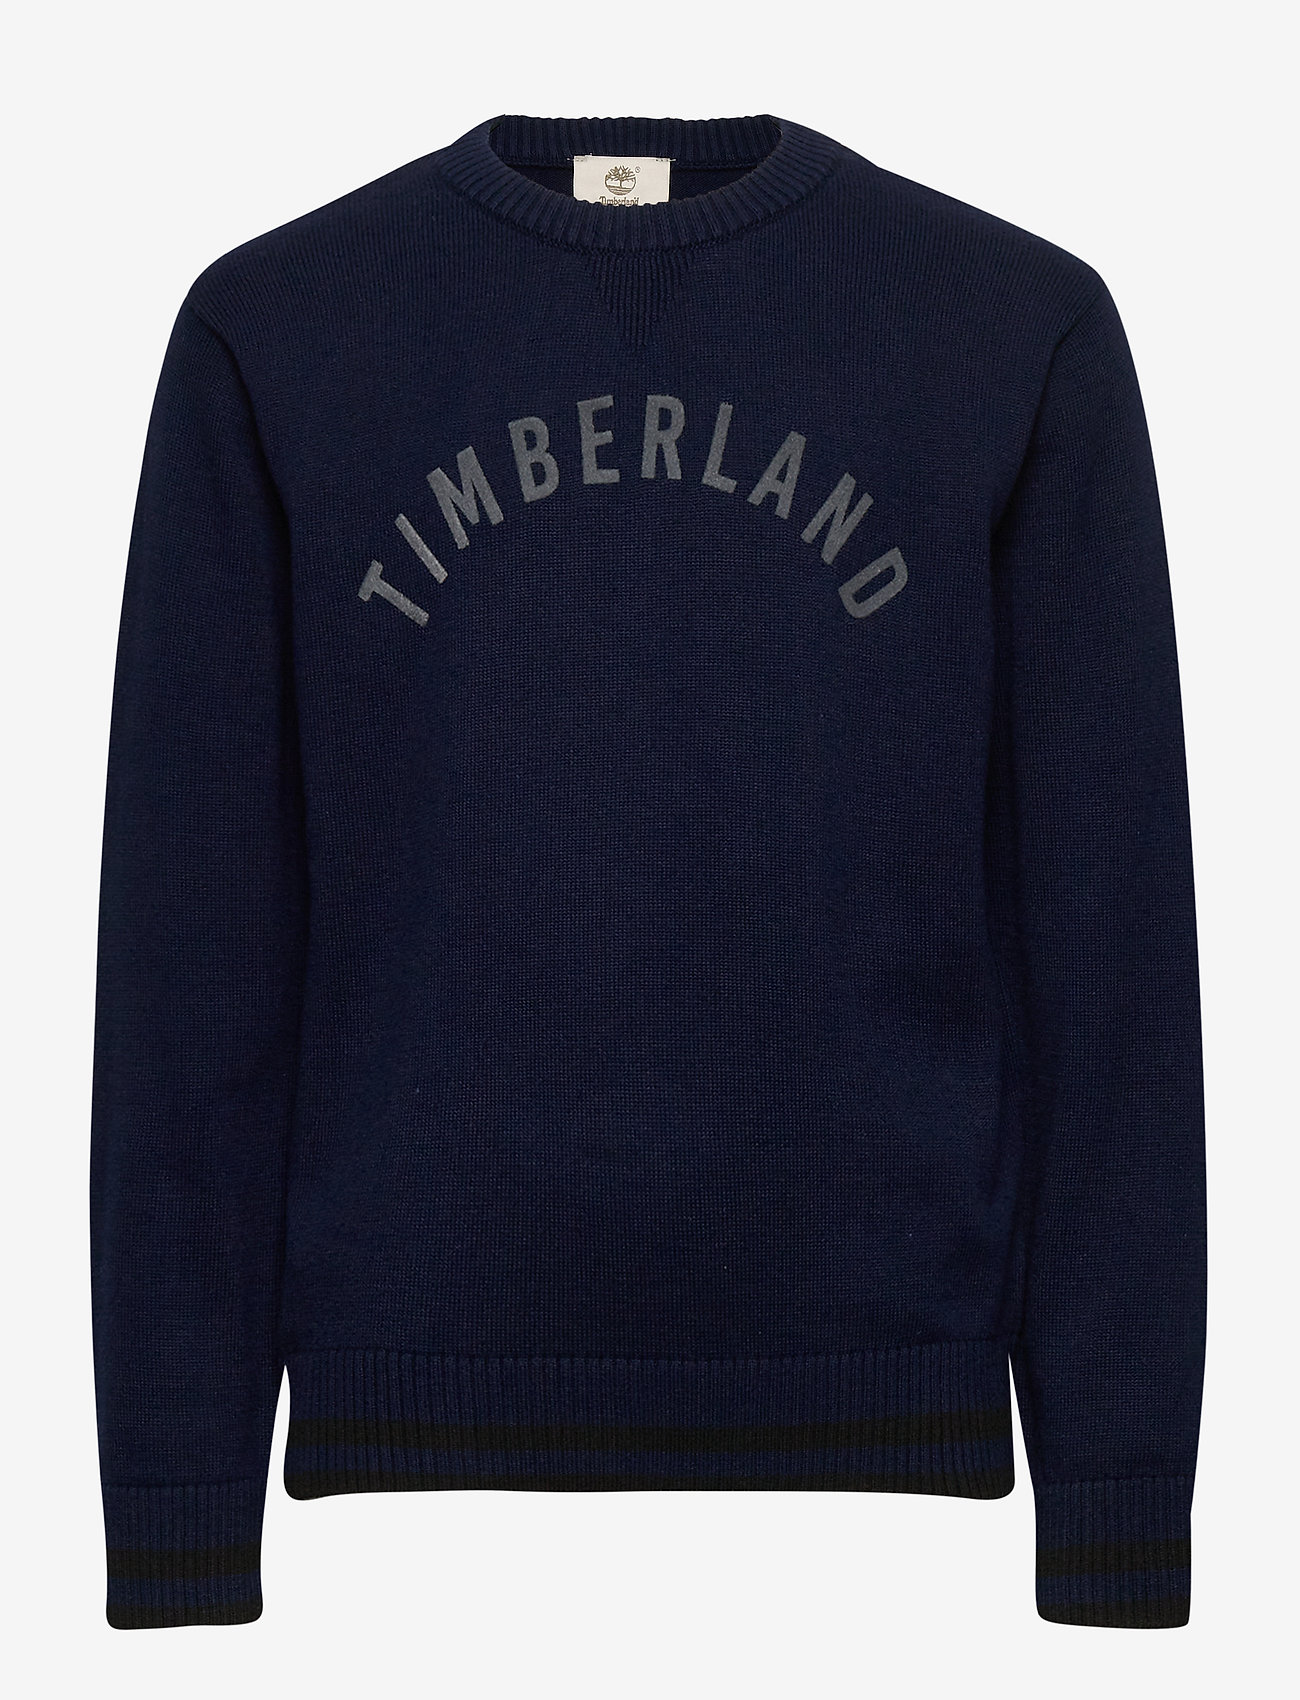 timberland pullovers